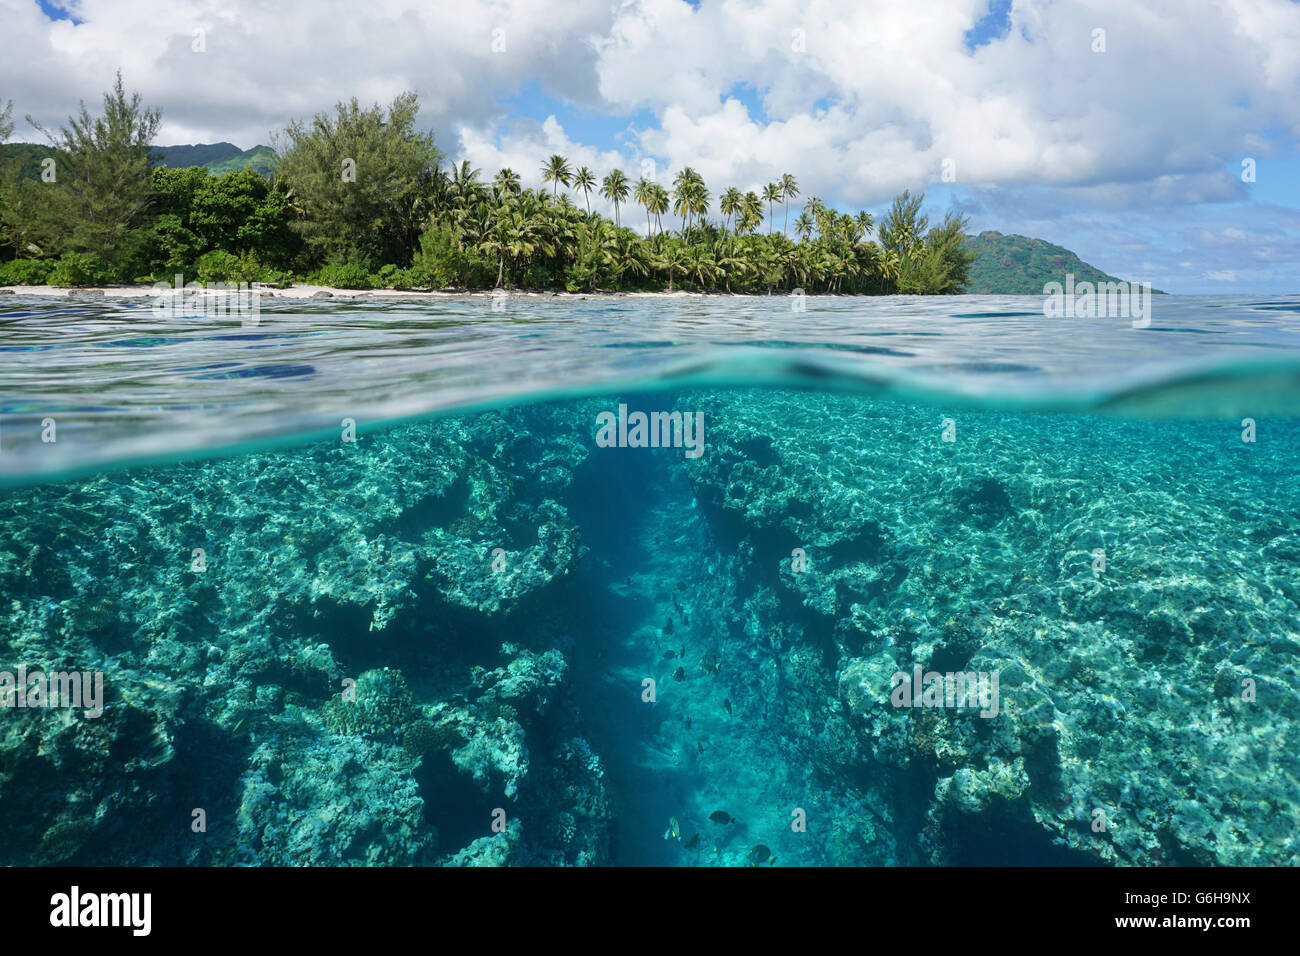 Landscape over and under water surface, tropical island shore with natural trench into the reef, Pacific ocean, French Polynesia Stock Photo